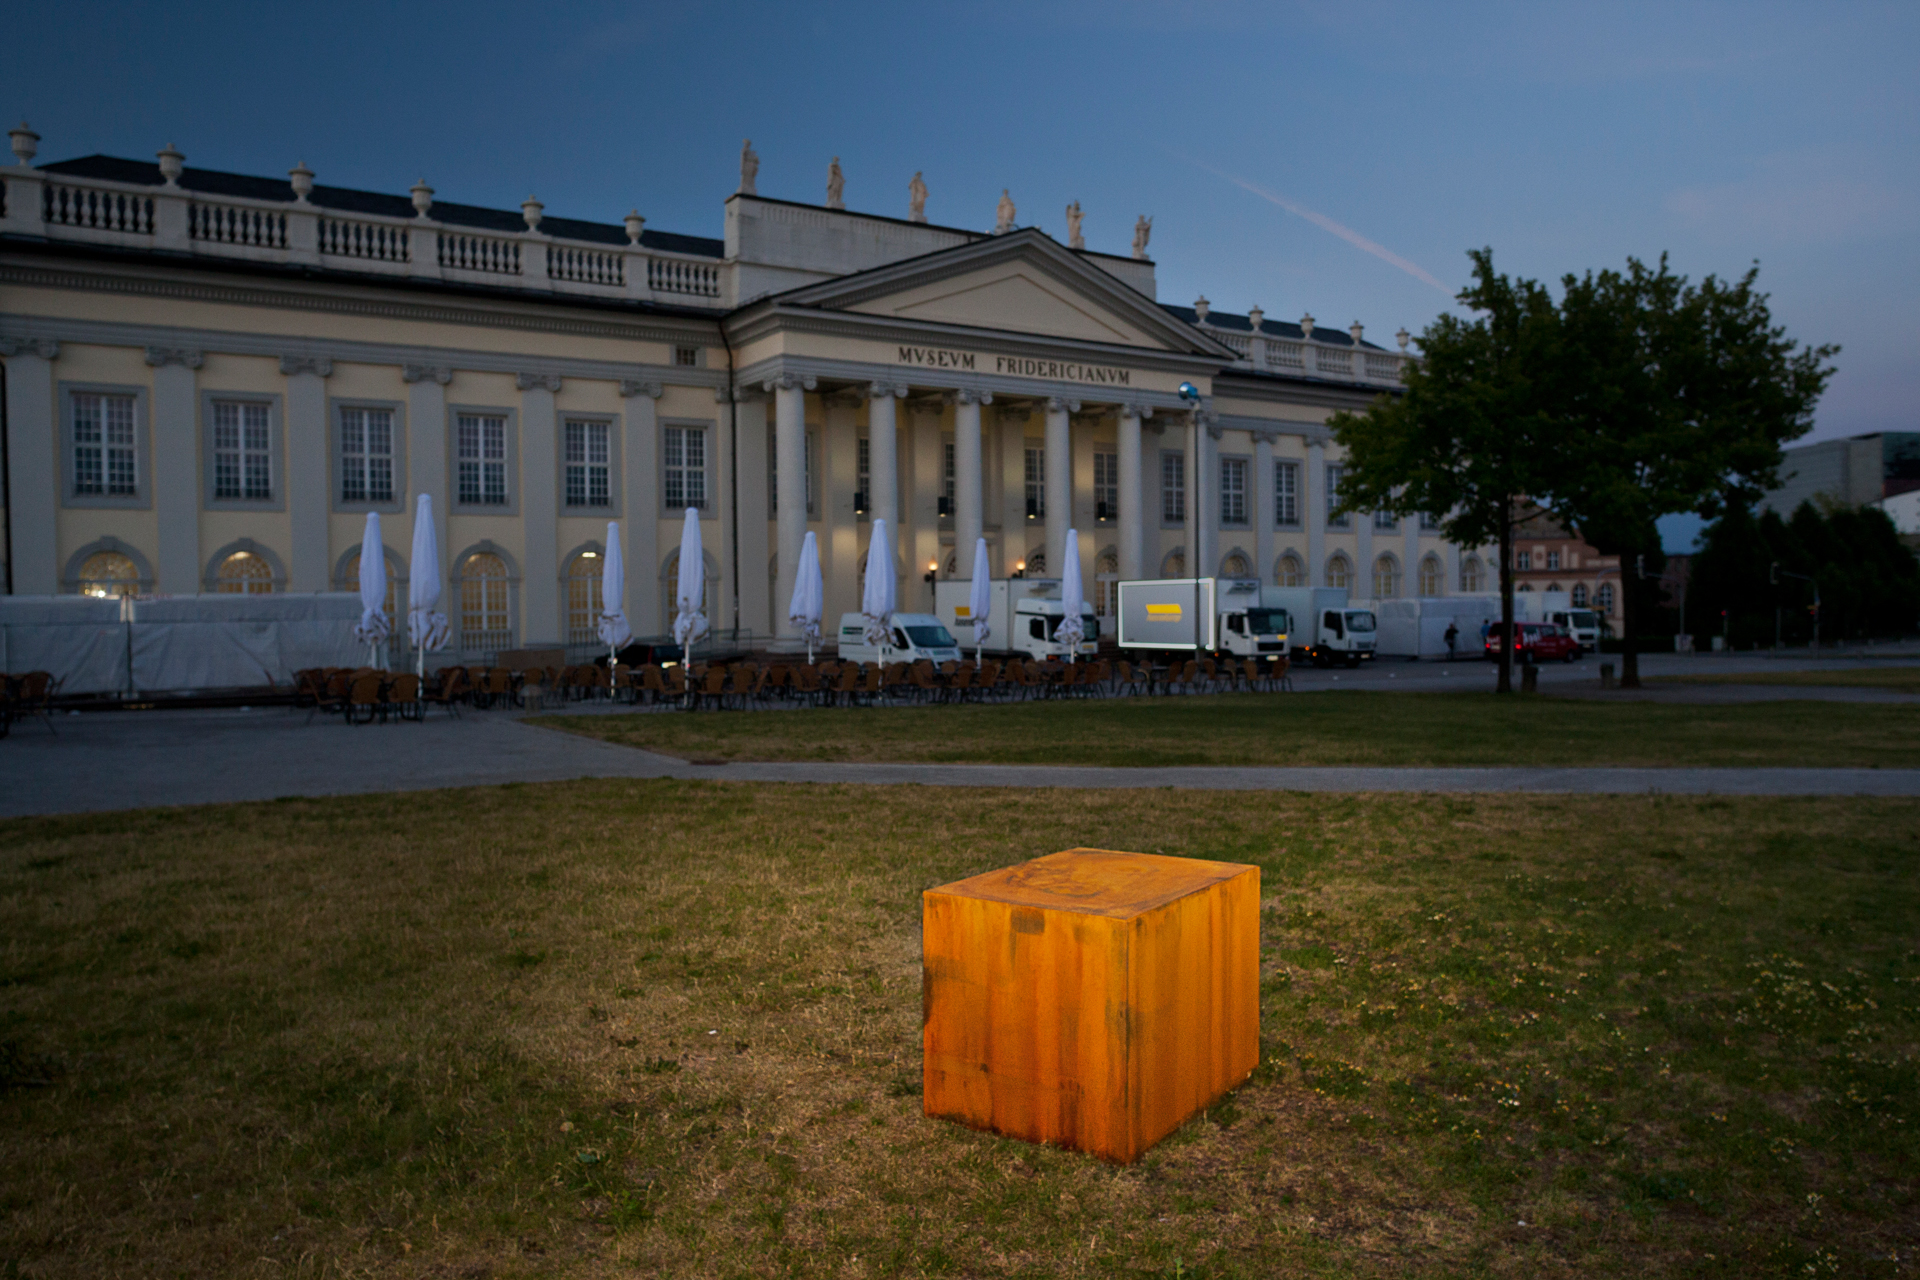  Argentinian artists Guillermo Faivovich &amp; Nicolas Goldberg intended to bring the second-largest meteorite on Earth, named El Chaco from Argentina to Kassel for dOCUMENTA(13). However, due to the resistance of indigenous people who live near the 